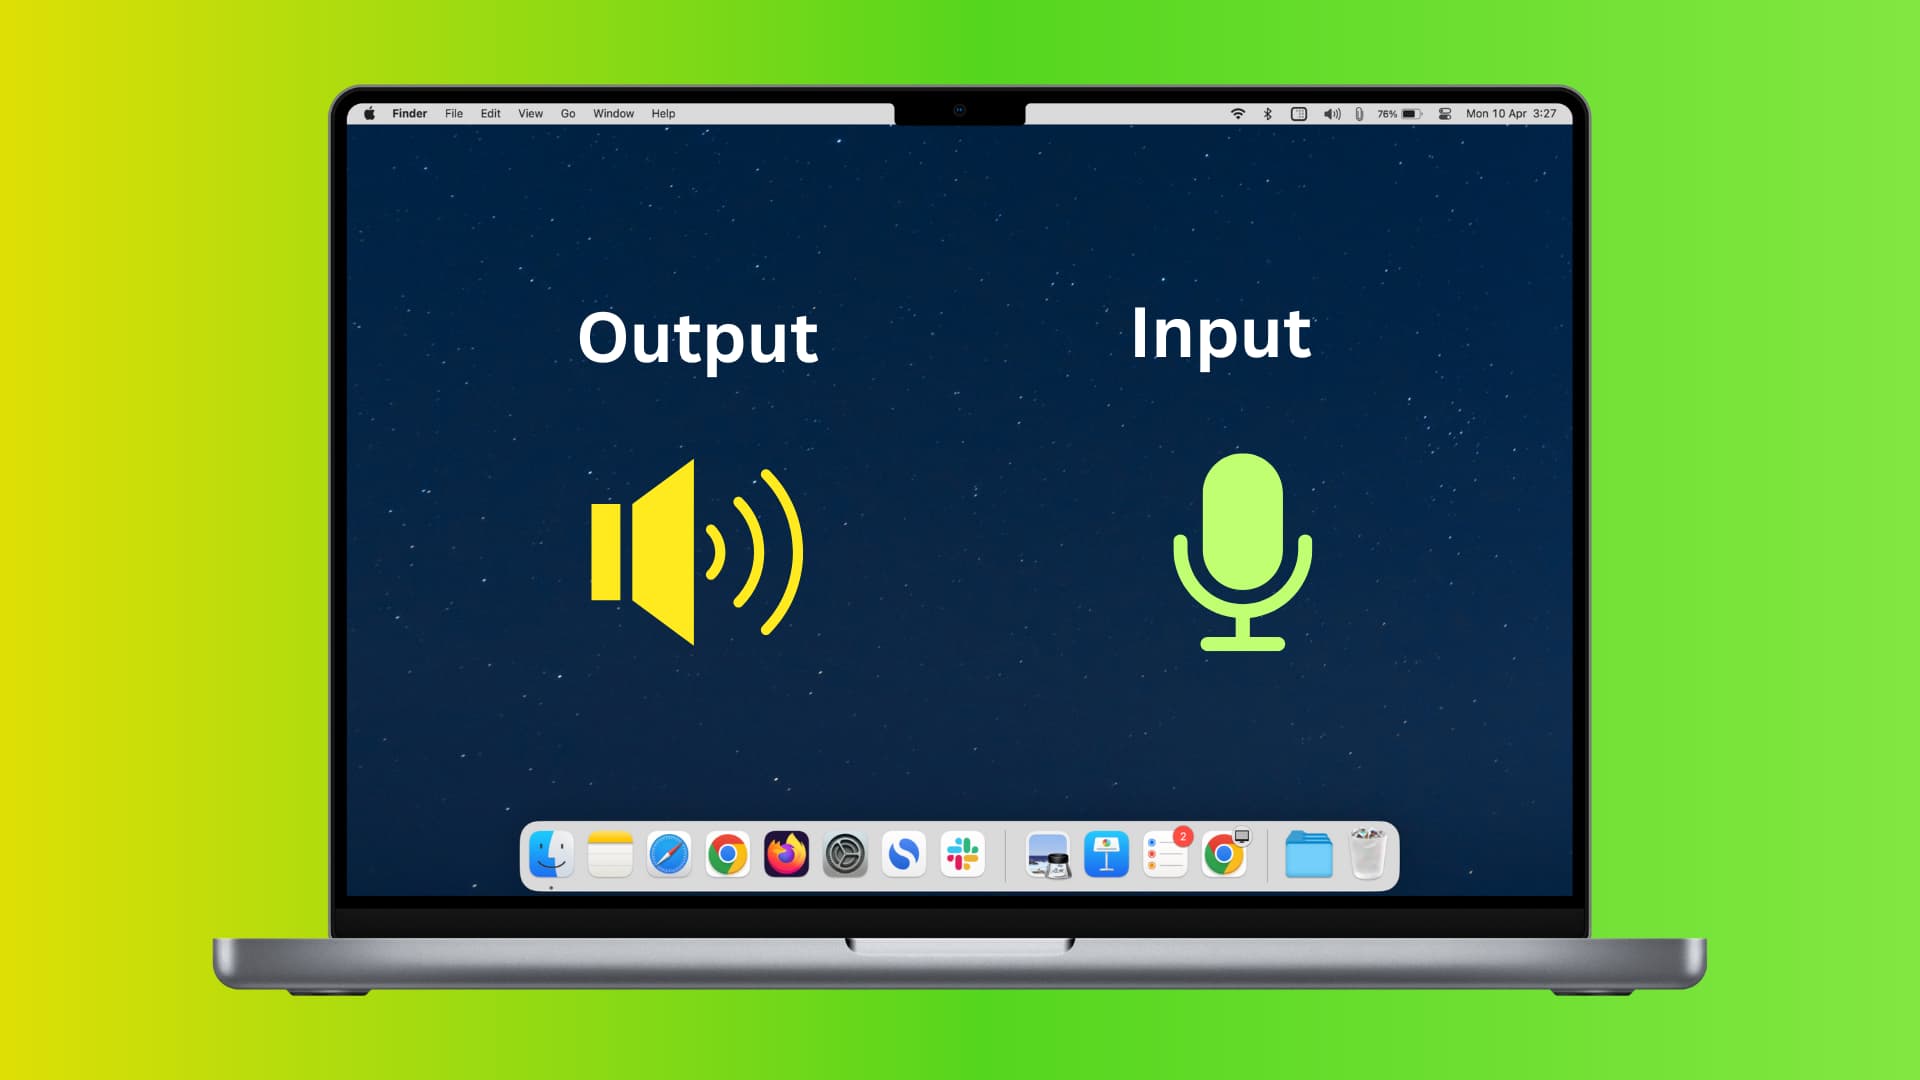 Audio output and input on Mac